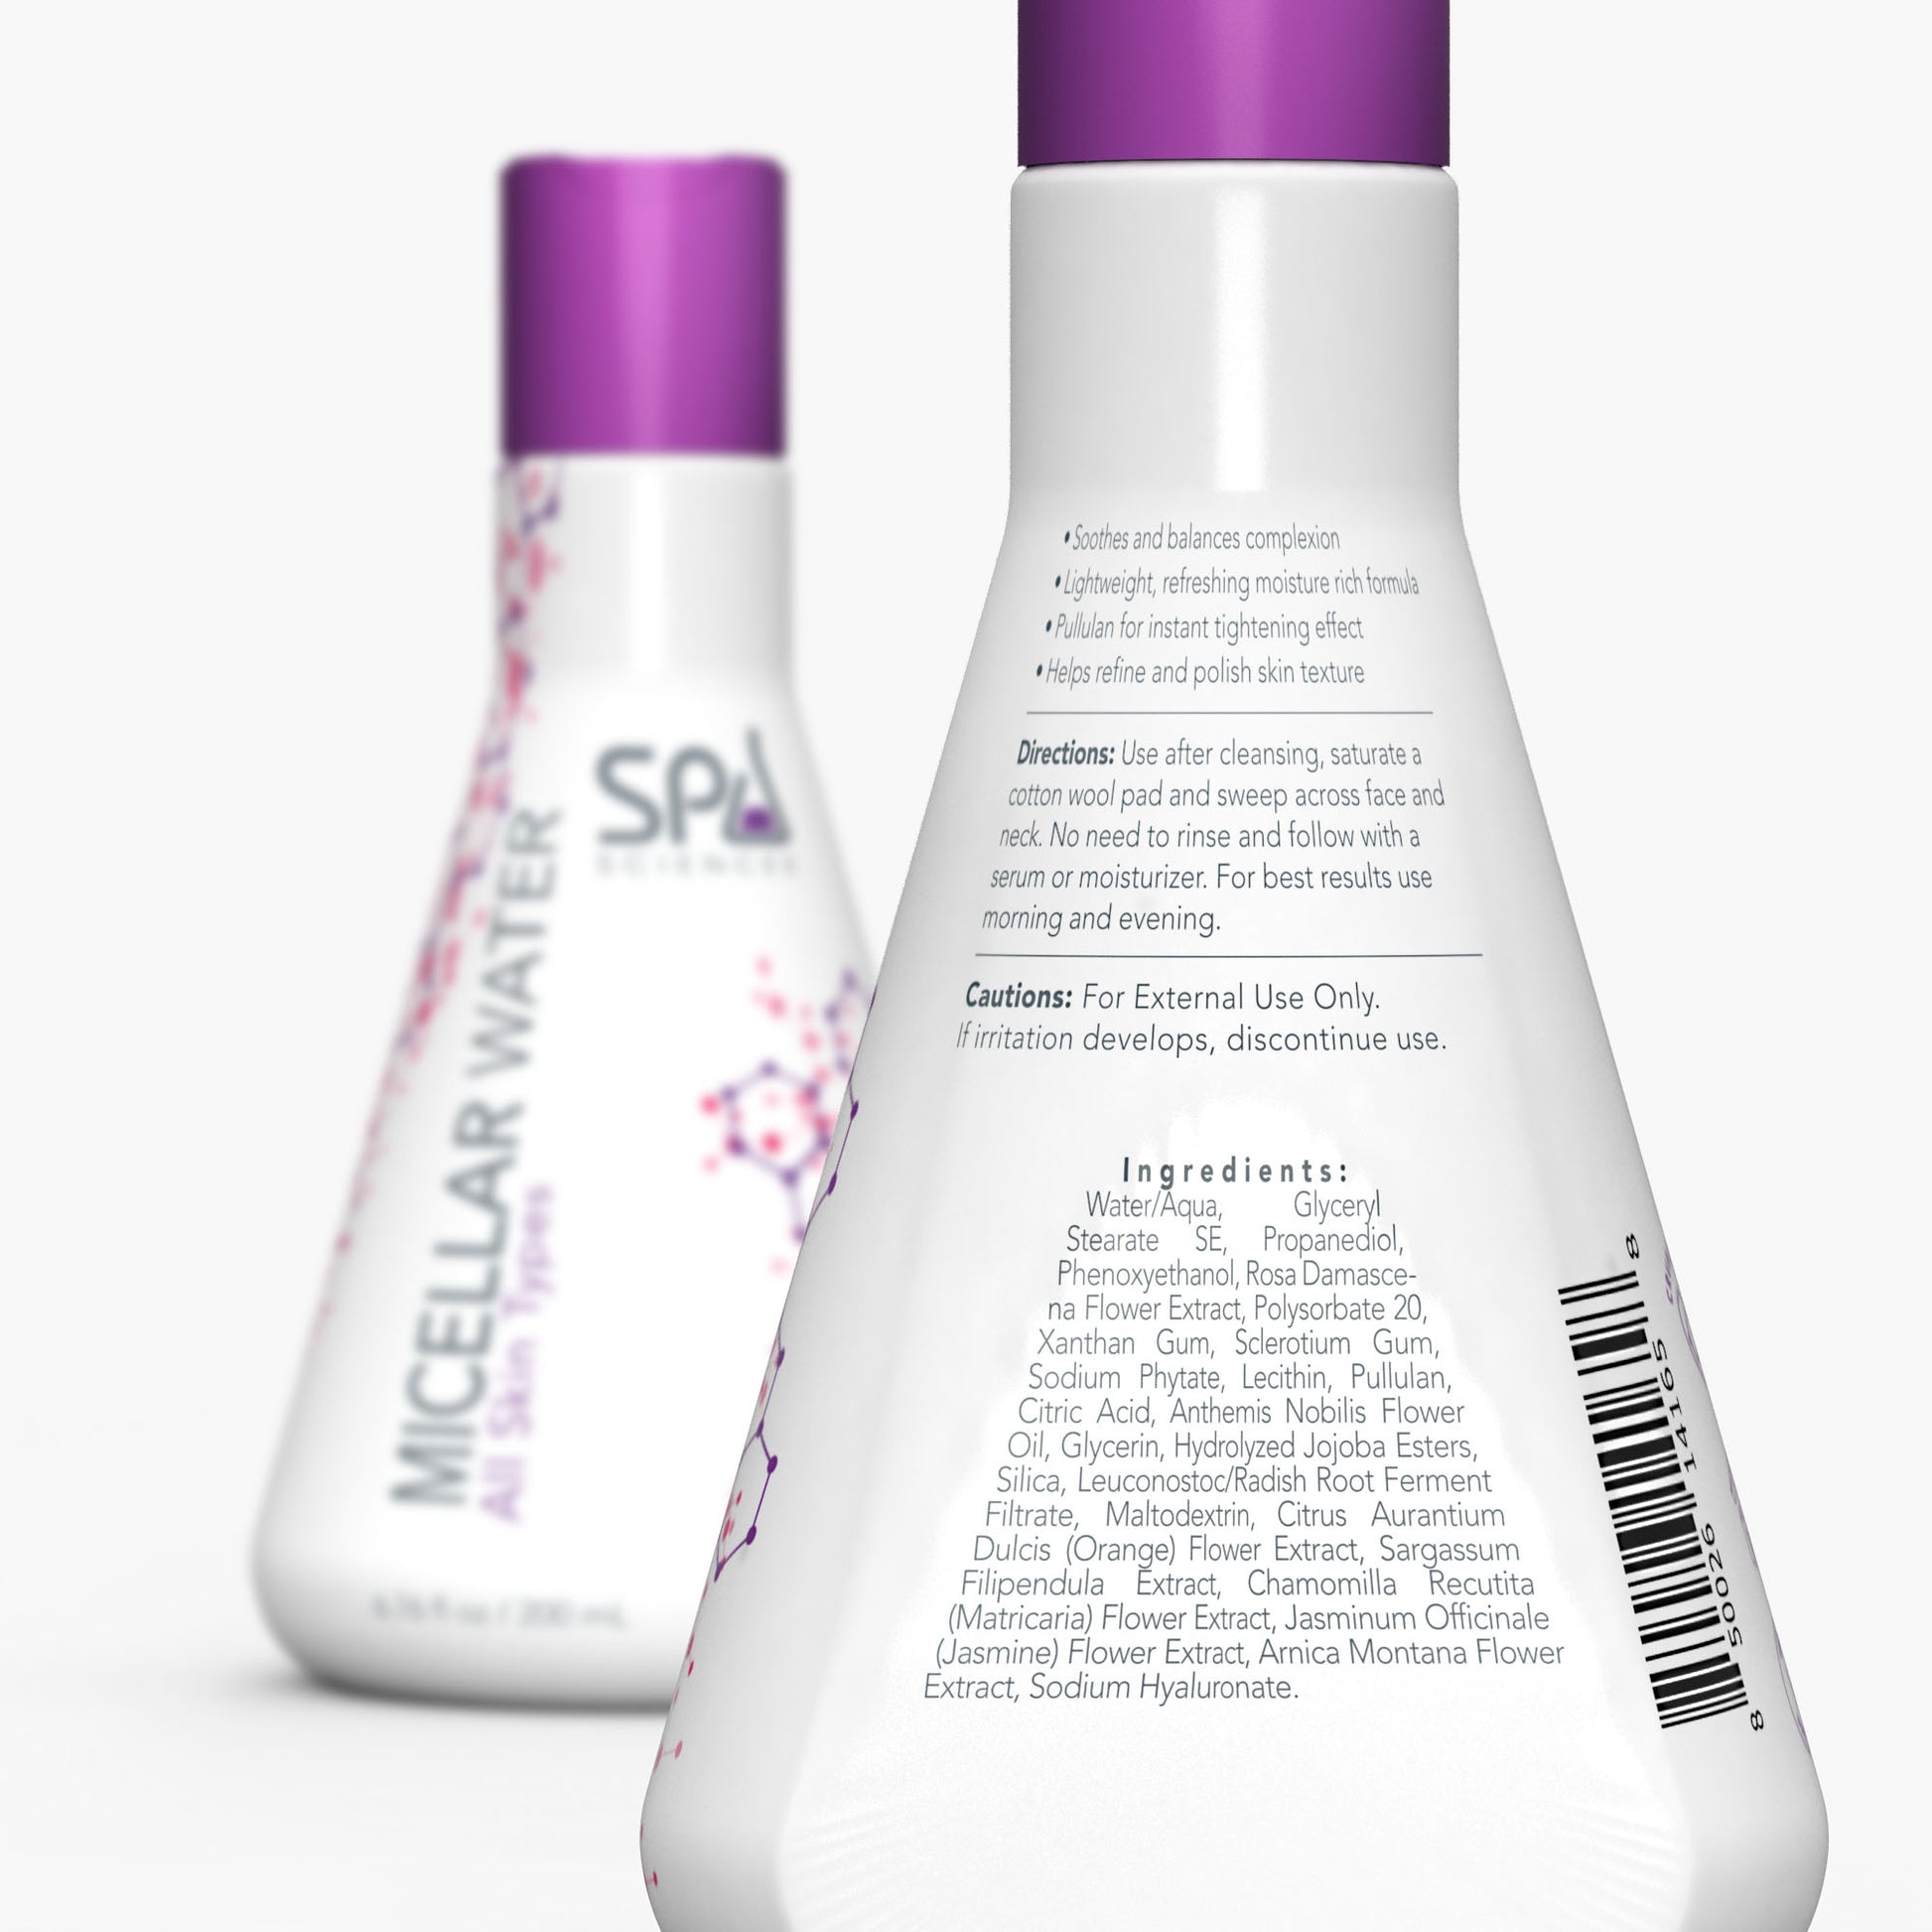 A bottle of Super Cleanser with a Spa Sciences purple label on it.